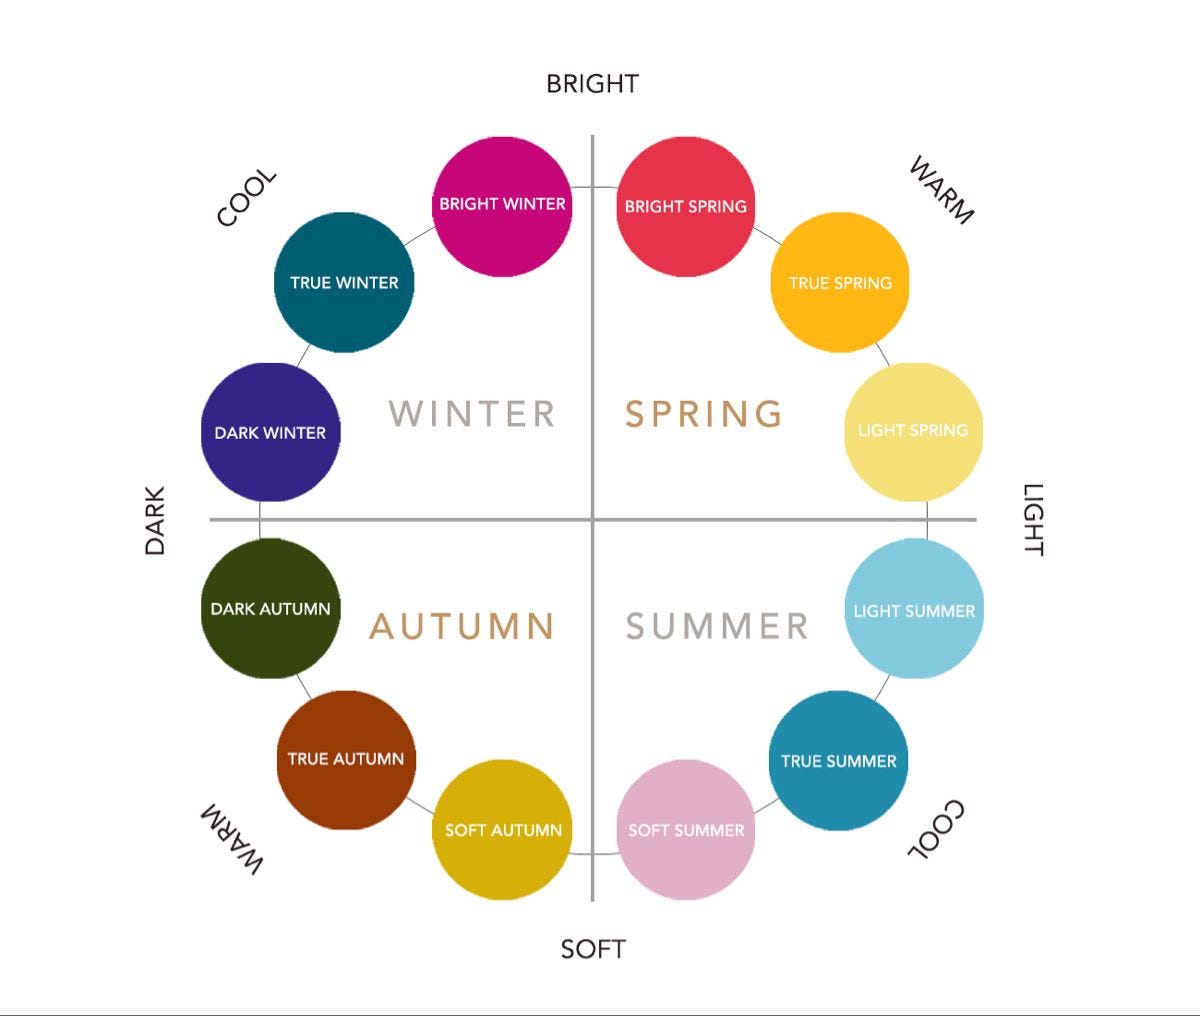 Discover Your Season in the Twelve Seasons Color Analysis